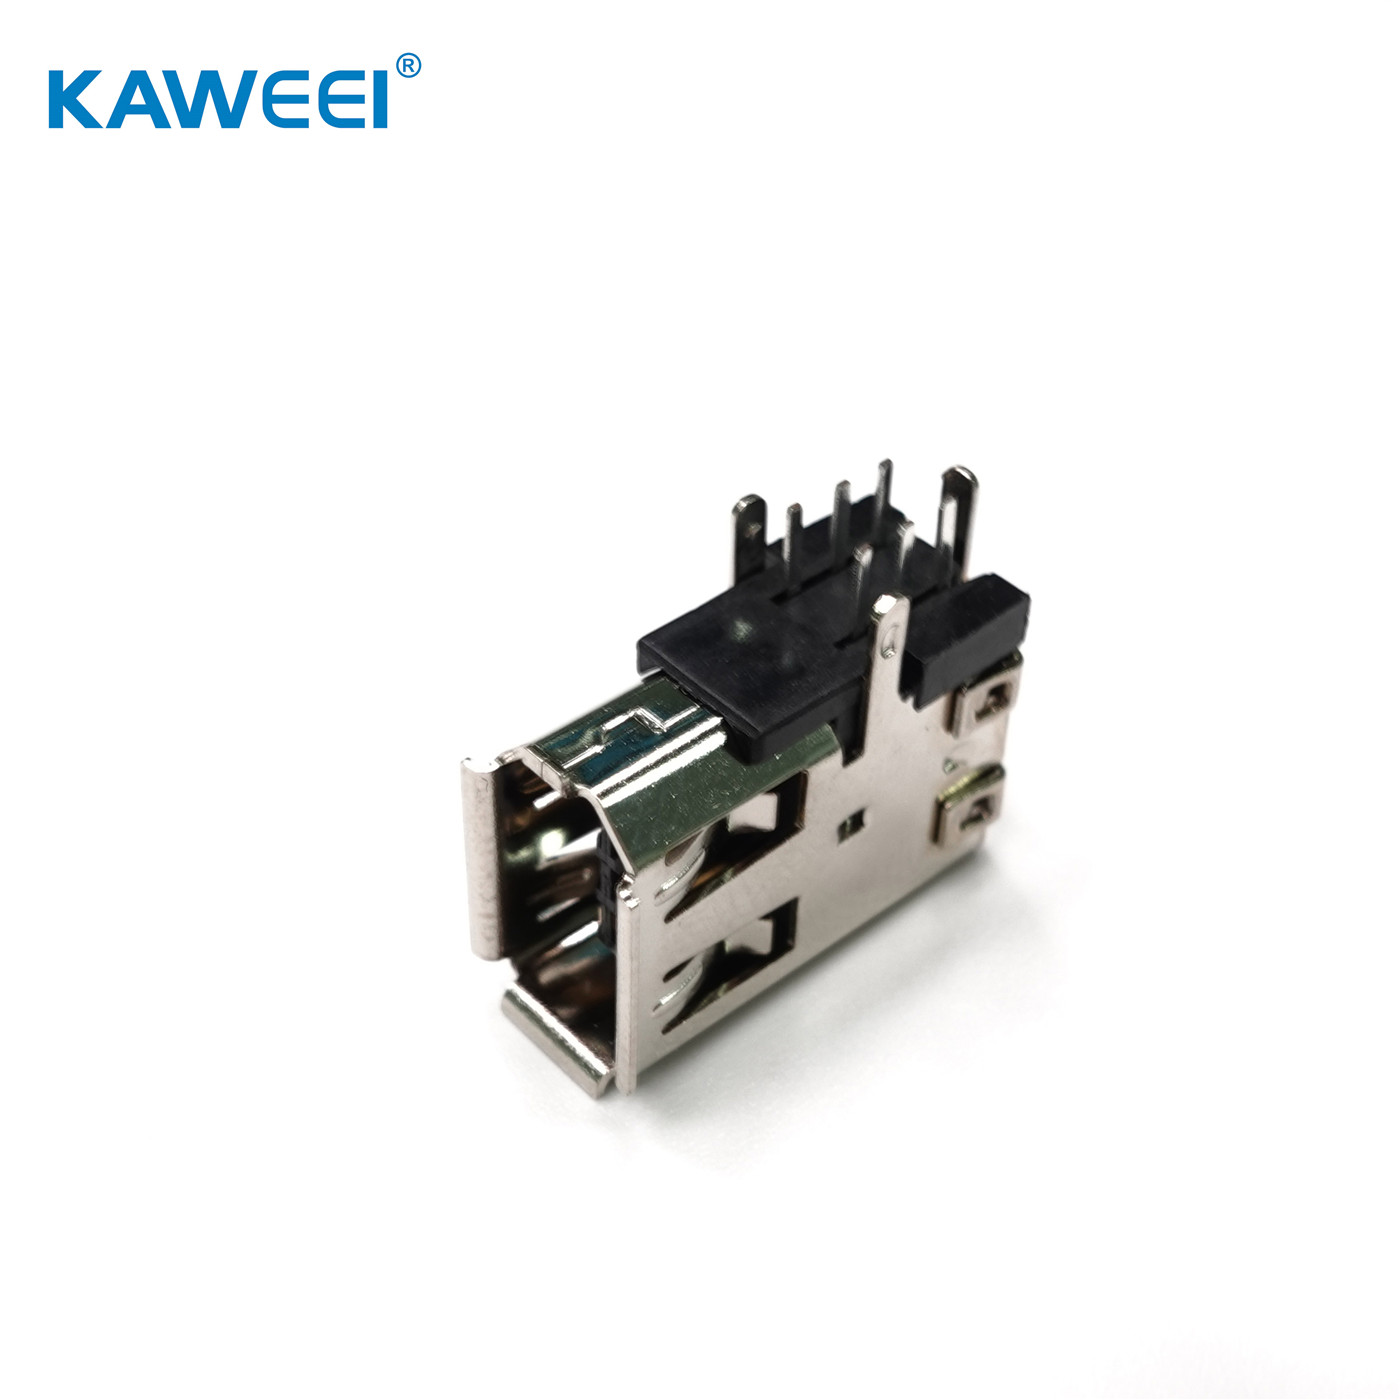 Mouse and keyboard USB 2.0 PCB insert Connector 01 (1)